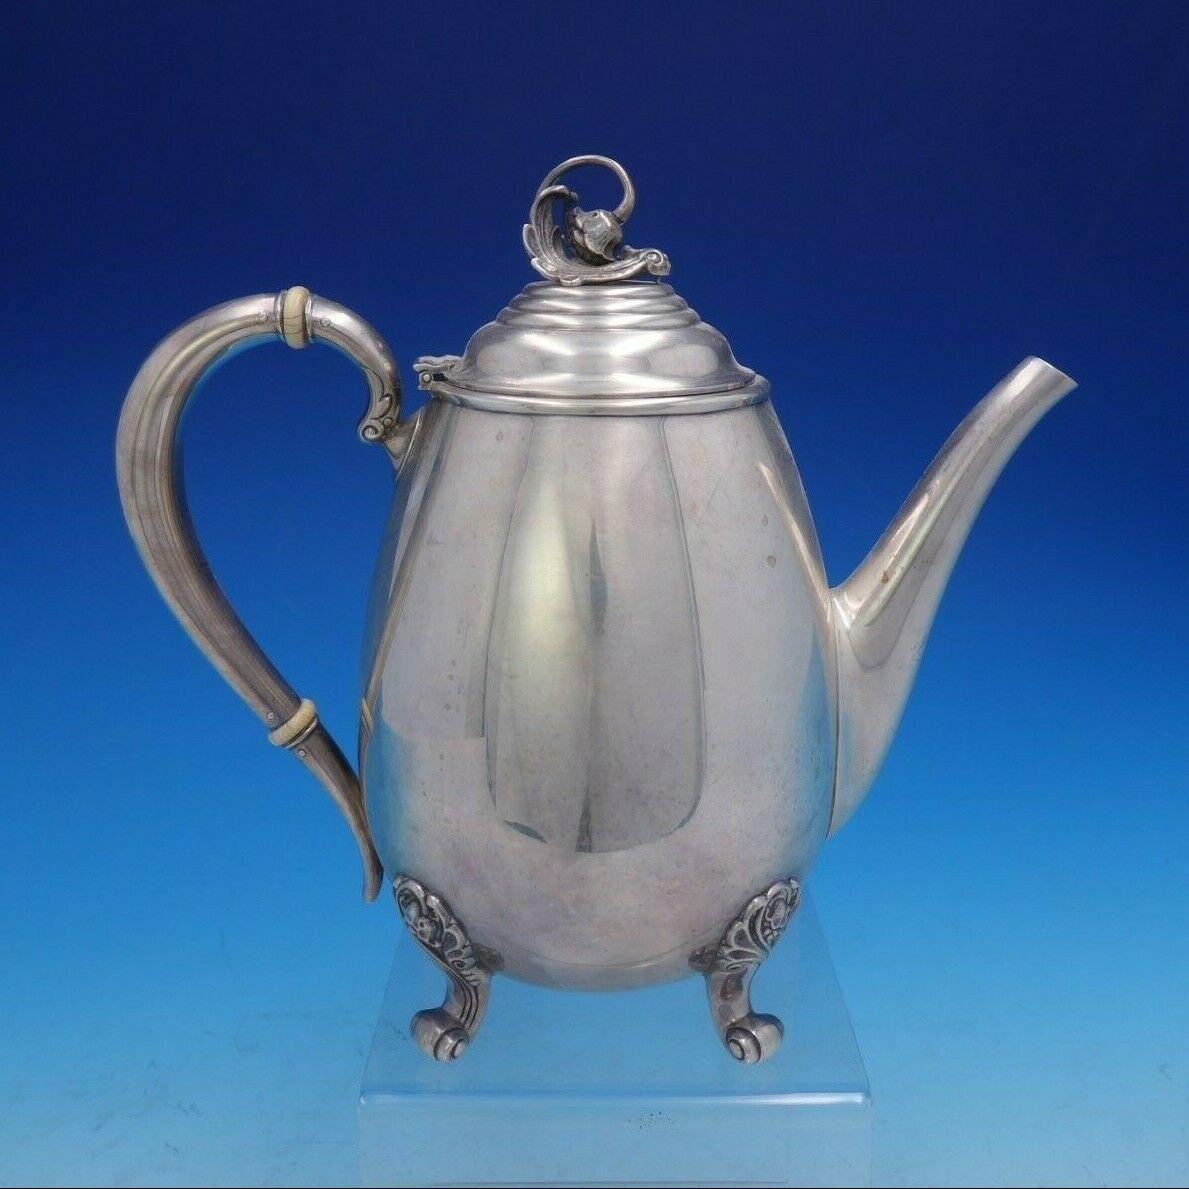 International

Spring Glory by International extra heavy sterling silver 5 piece tea set marked #C360. The coffee pot measures 9